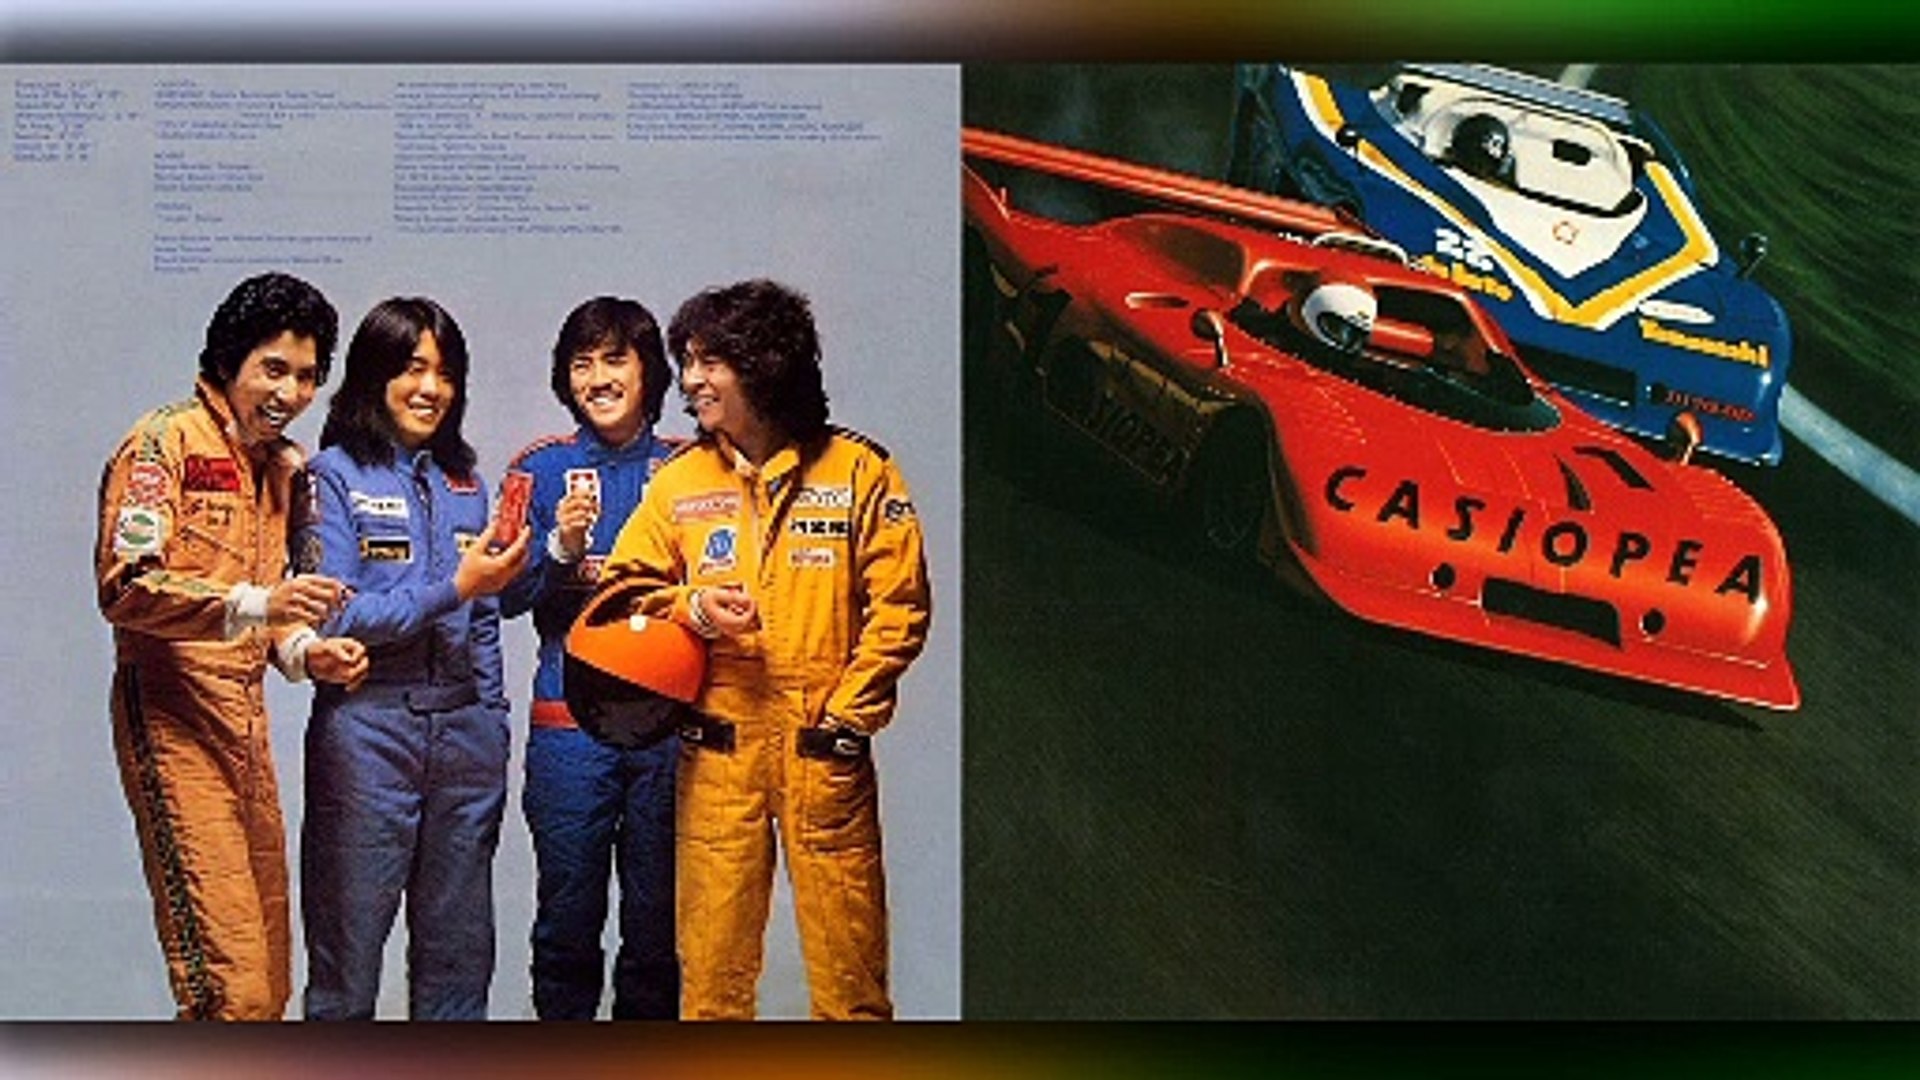 Casiopea Discography by J-Pop Fantasia - Dailymotion